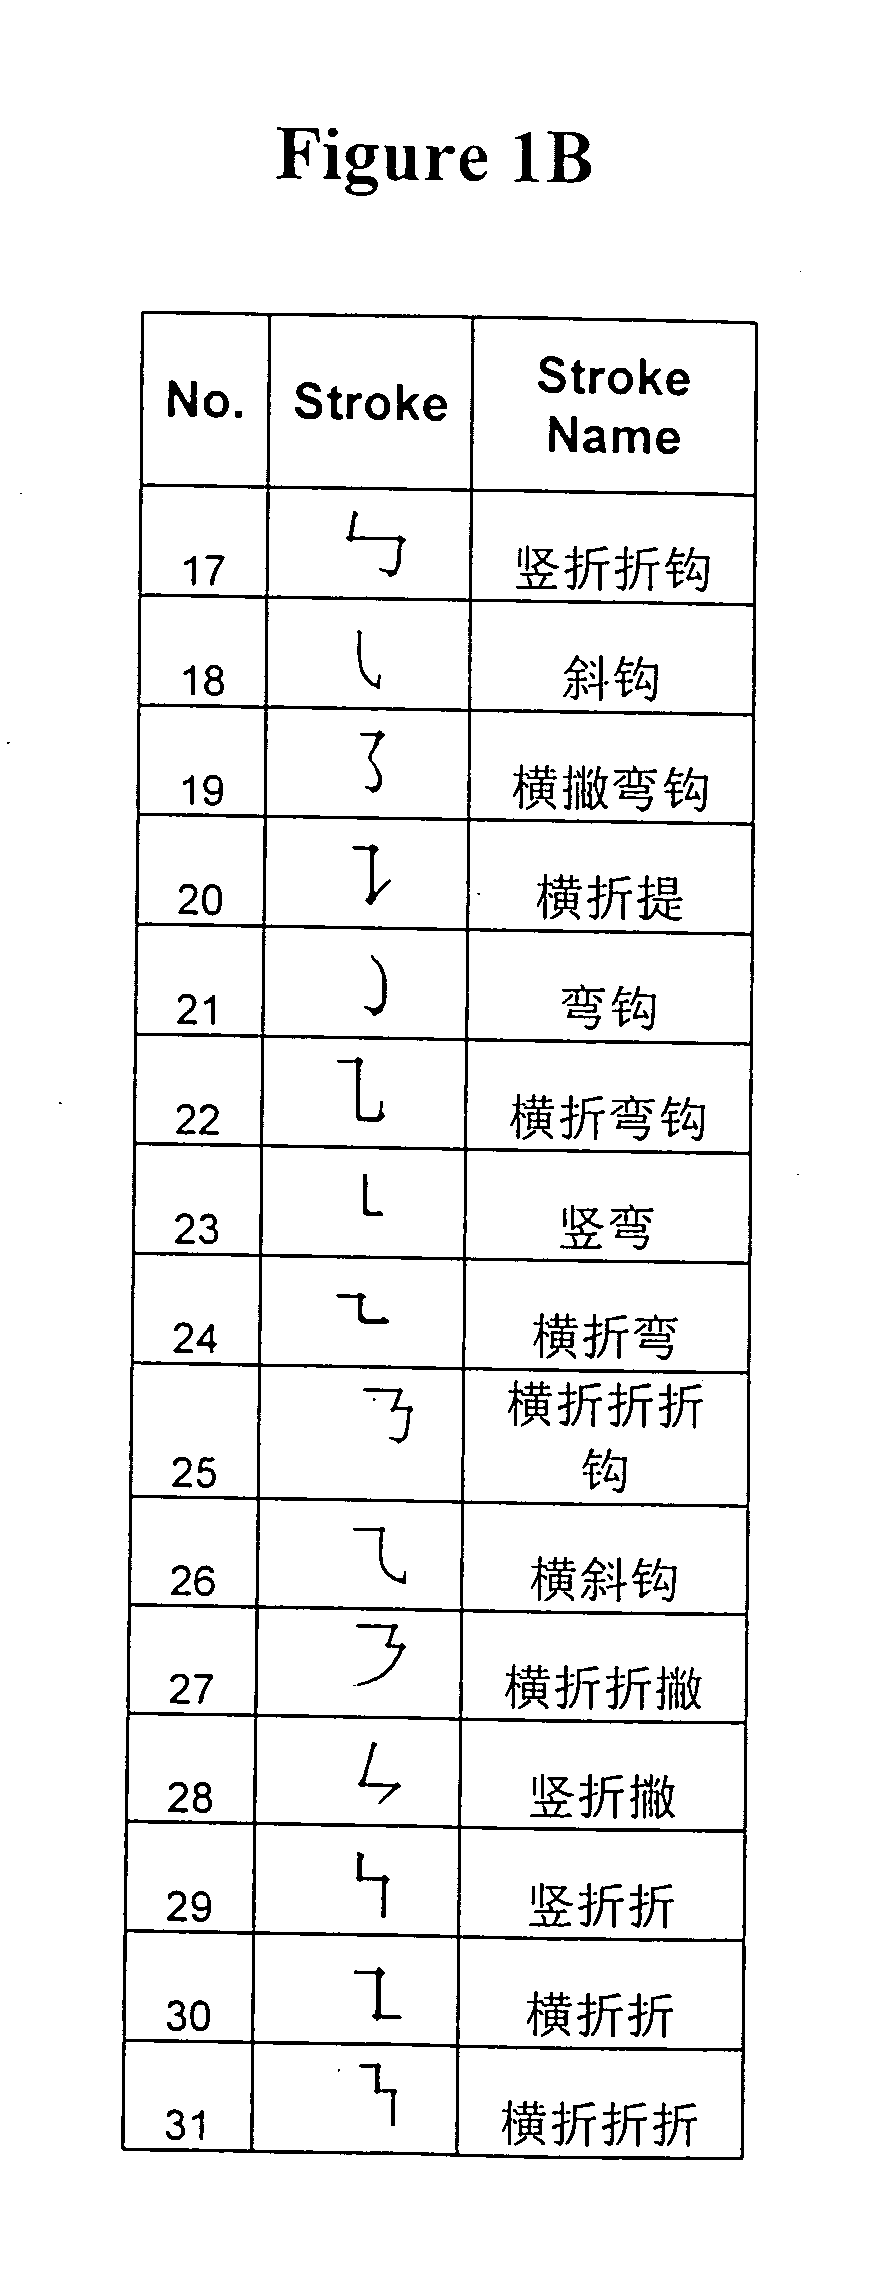 Method of organizing chinese characters